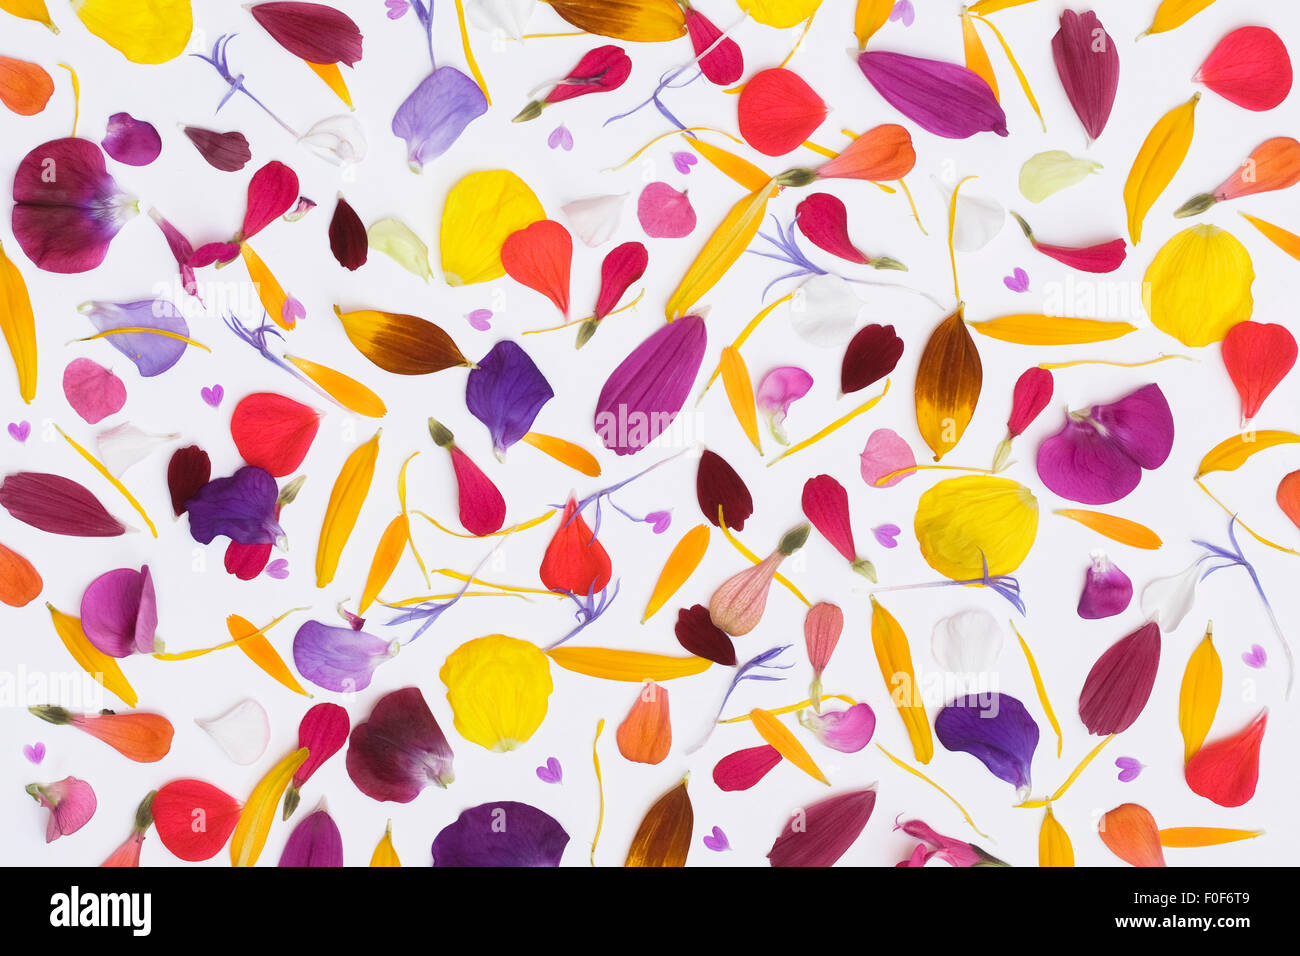 Assorted flower petals on a white background. Stock Photo